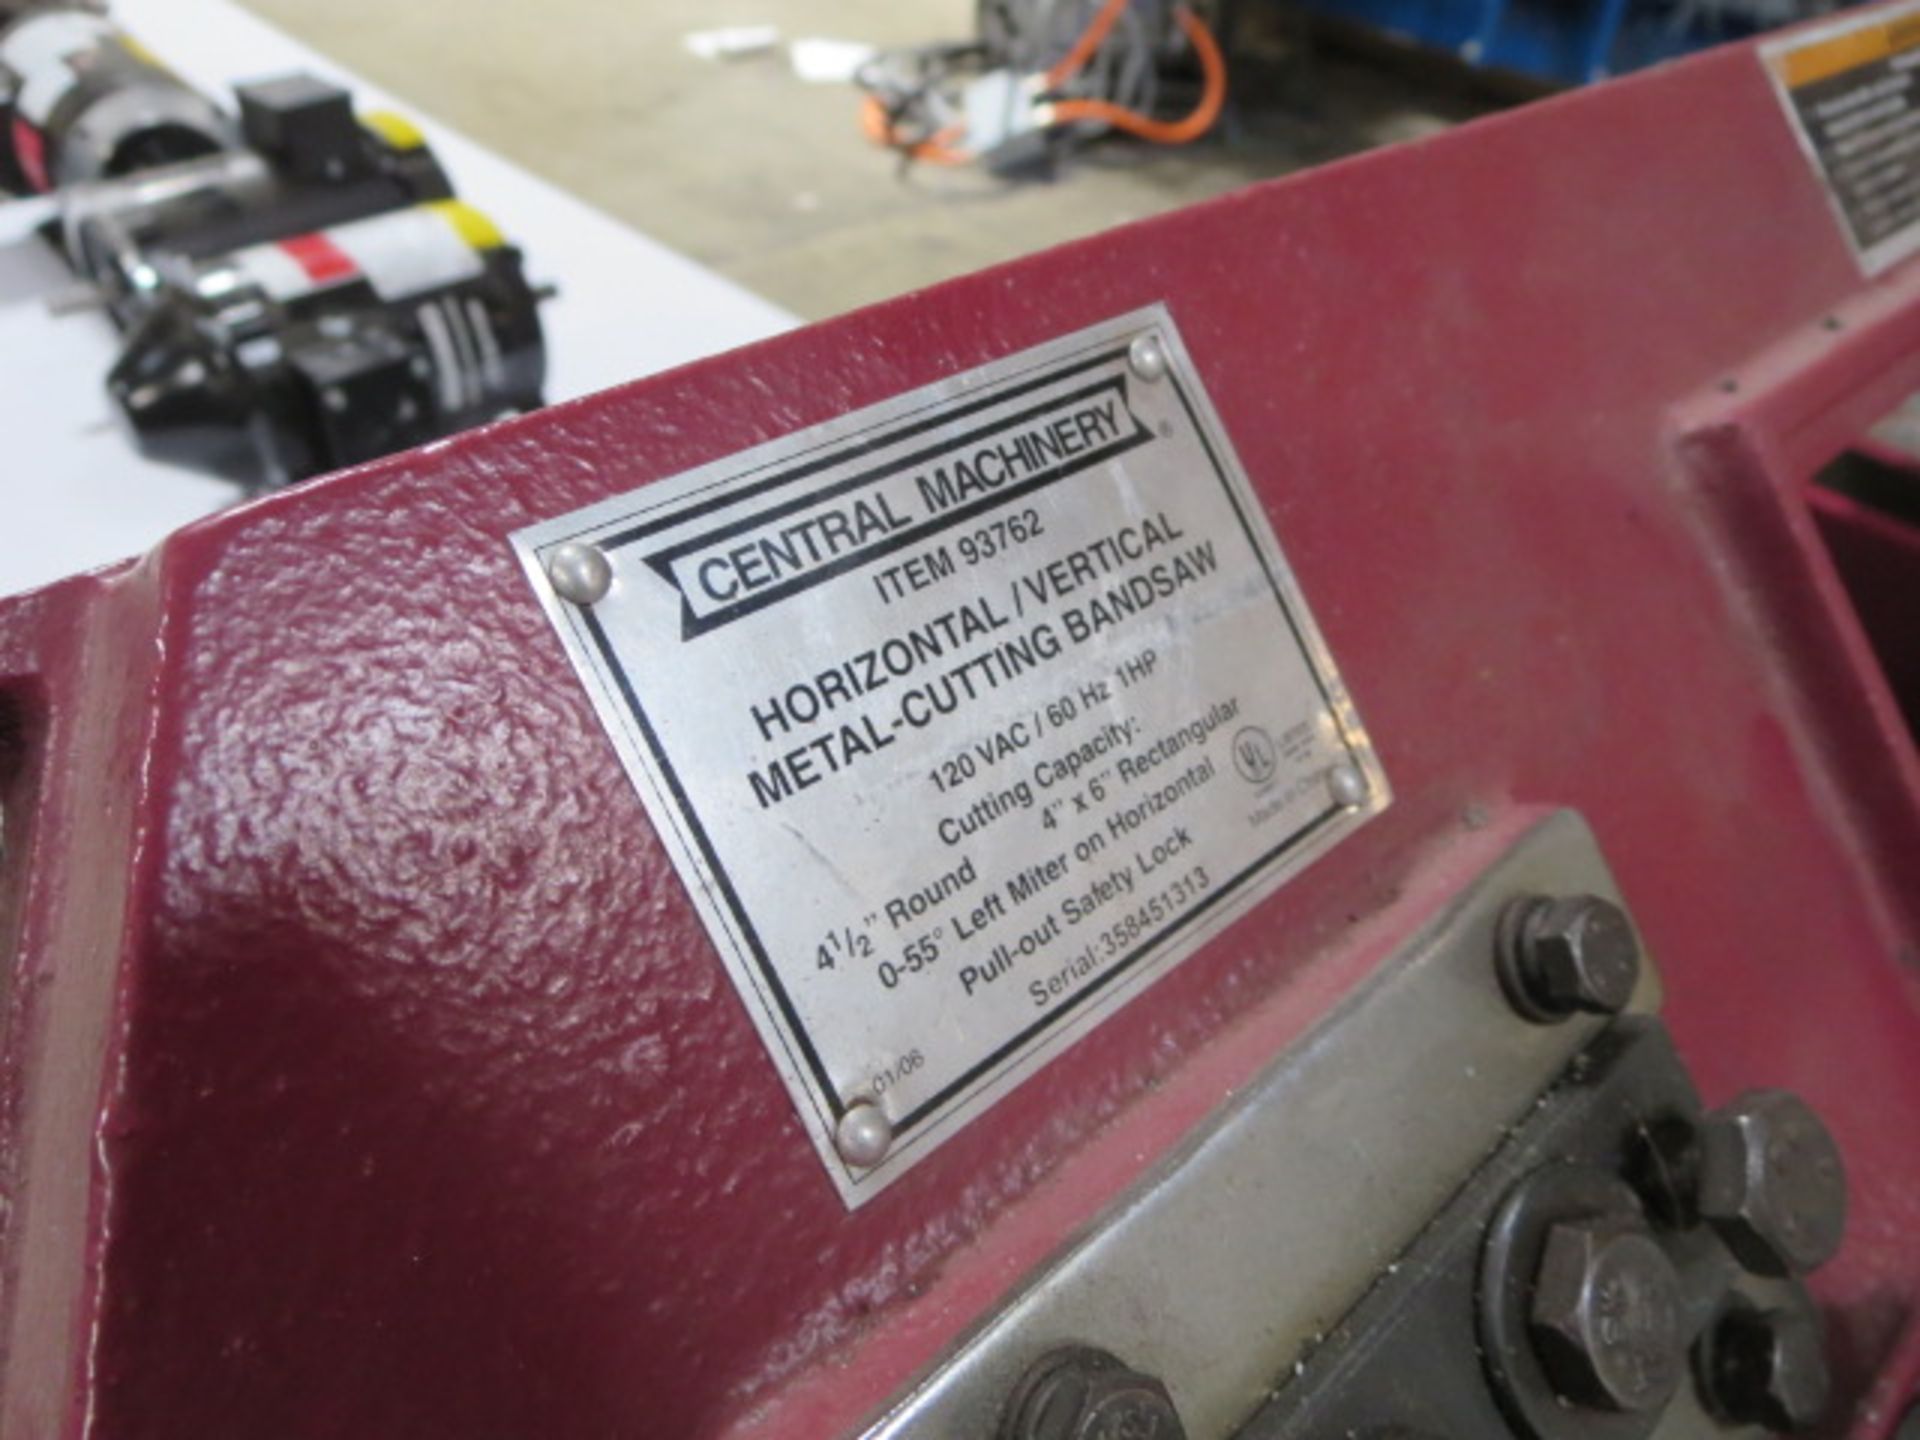 Central Machinery Horizontal/Vertical Metal Cutting Band Saw, model 93762, Includes Rolling Cart - Image 2 of 2